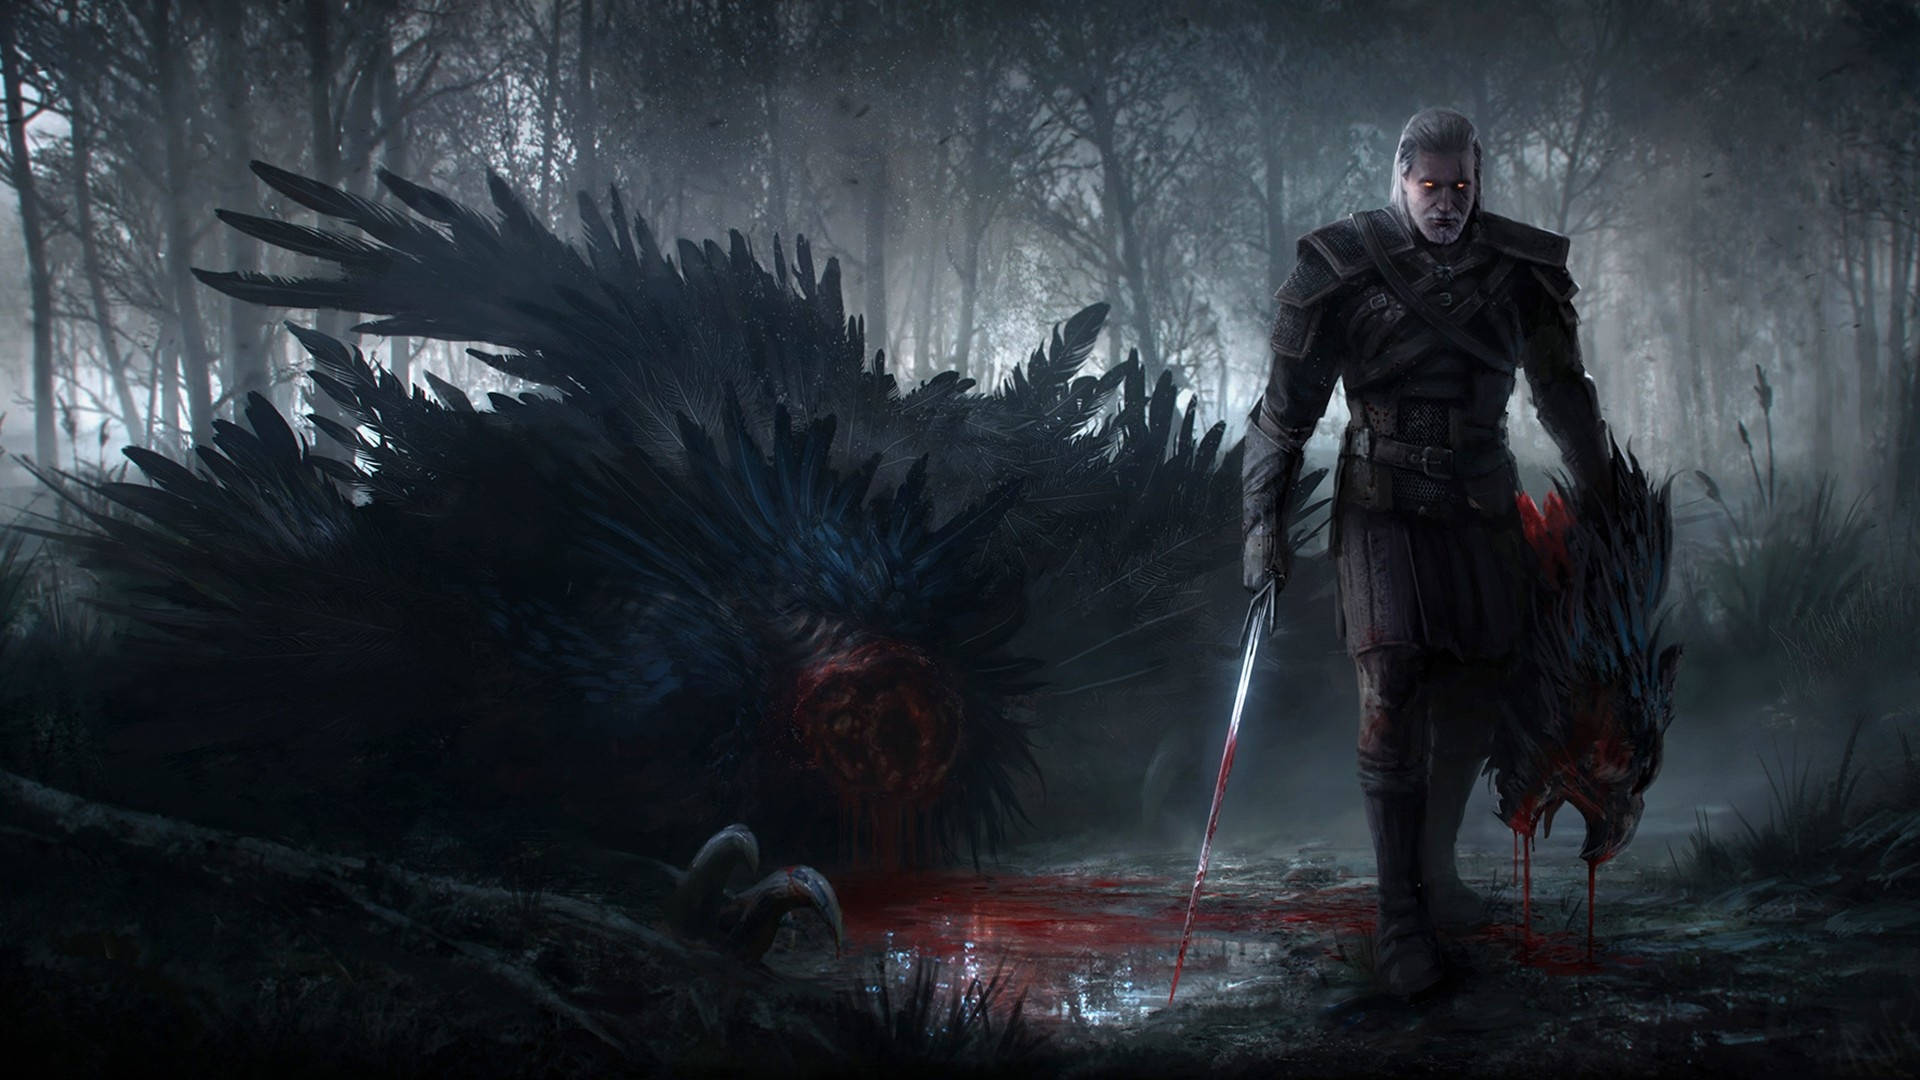 A triumphant Geralt of Rivia beheading a monster in The Witcher 3 Wallpaper